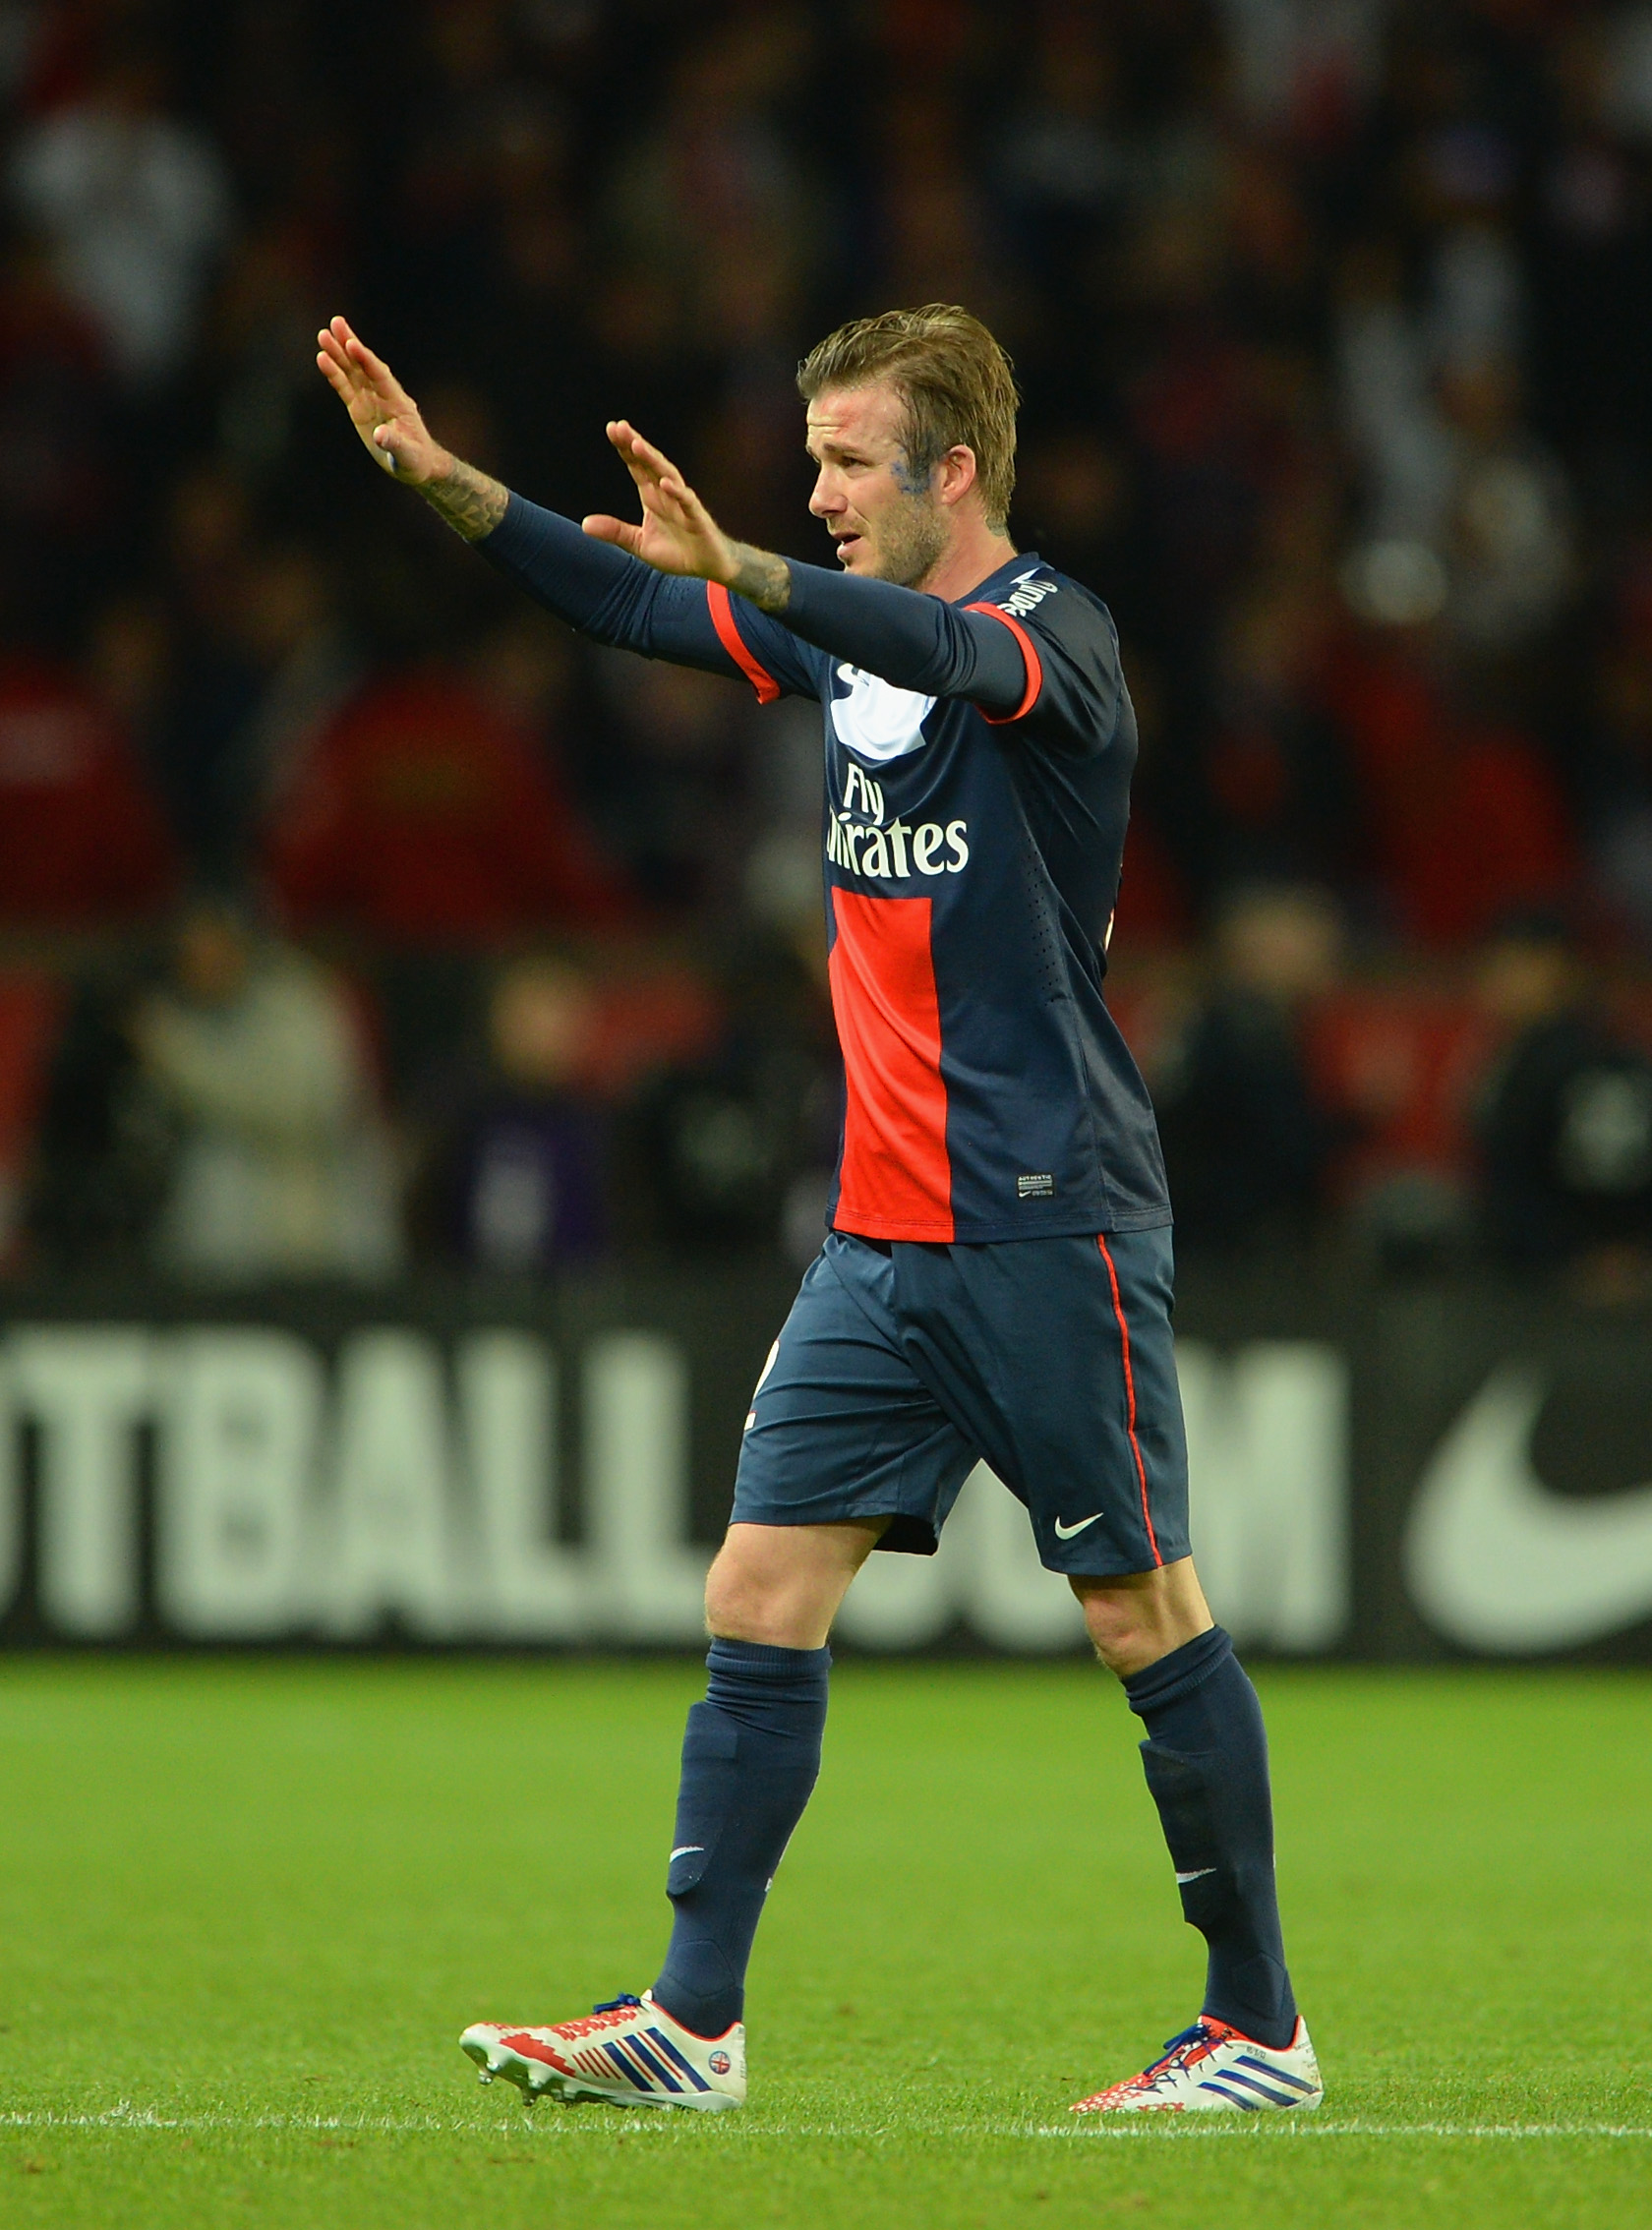 David Beckham waves to the crowd after his final Ligue 1 match on May 18, 2013 in Paris, France. | Source: Getty Images